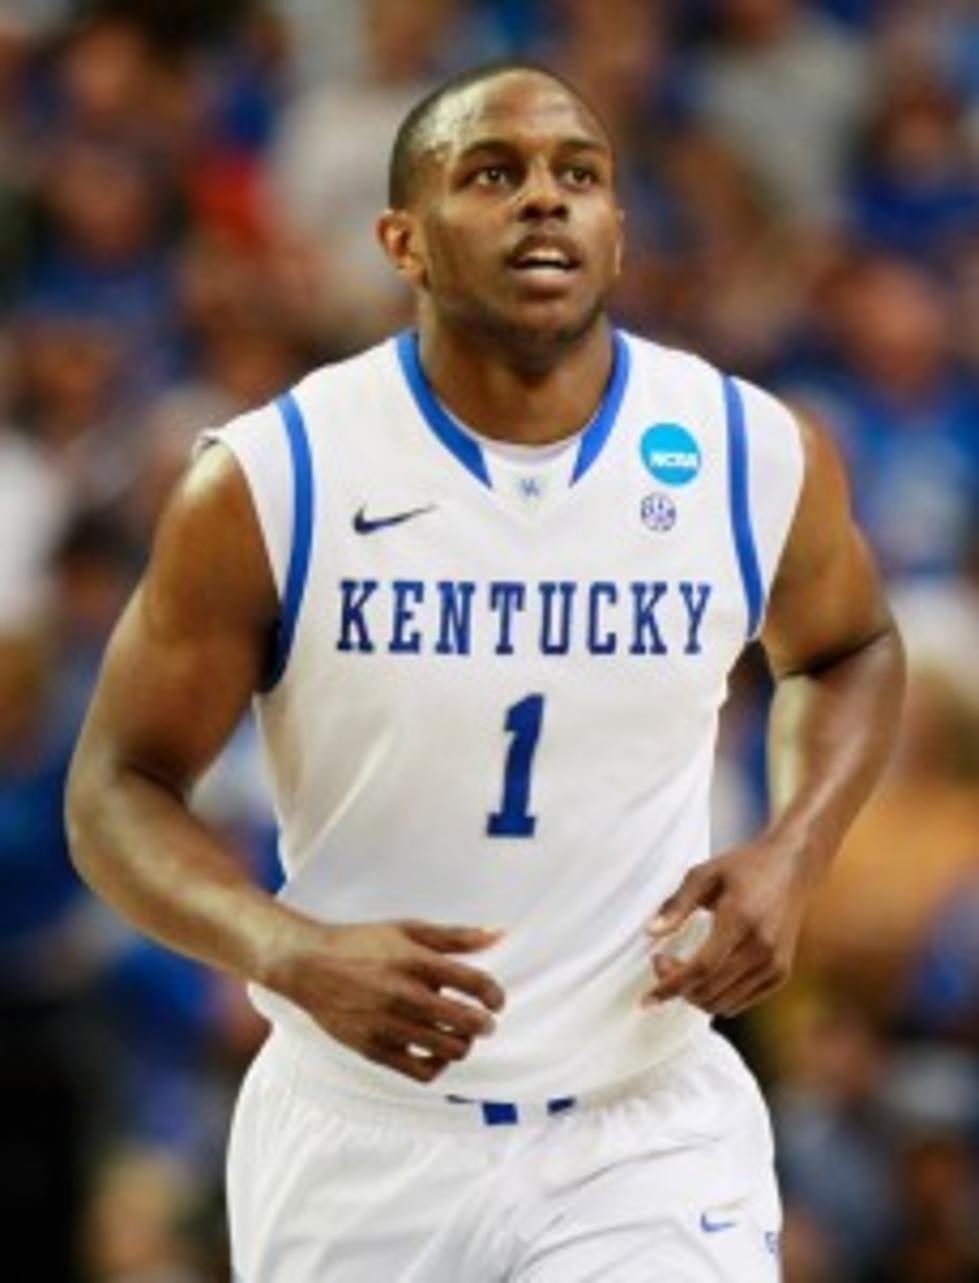 Hornets Select Darius Miller With Second Round Pick